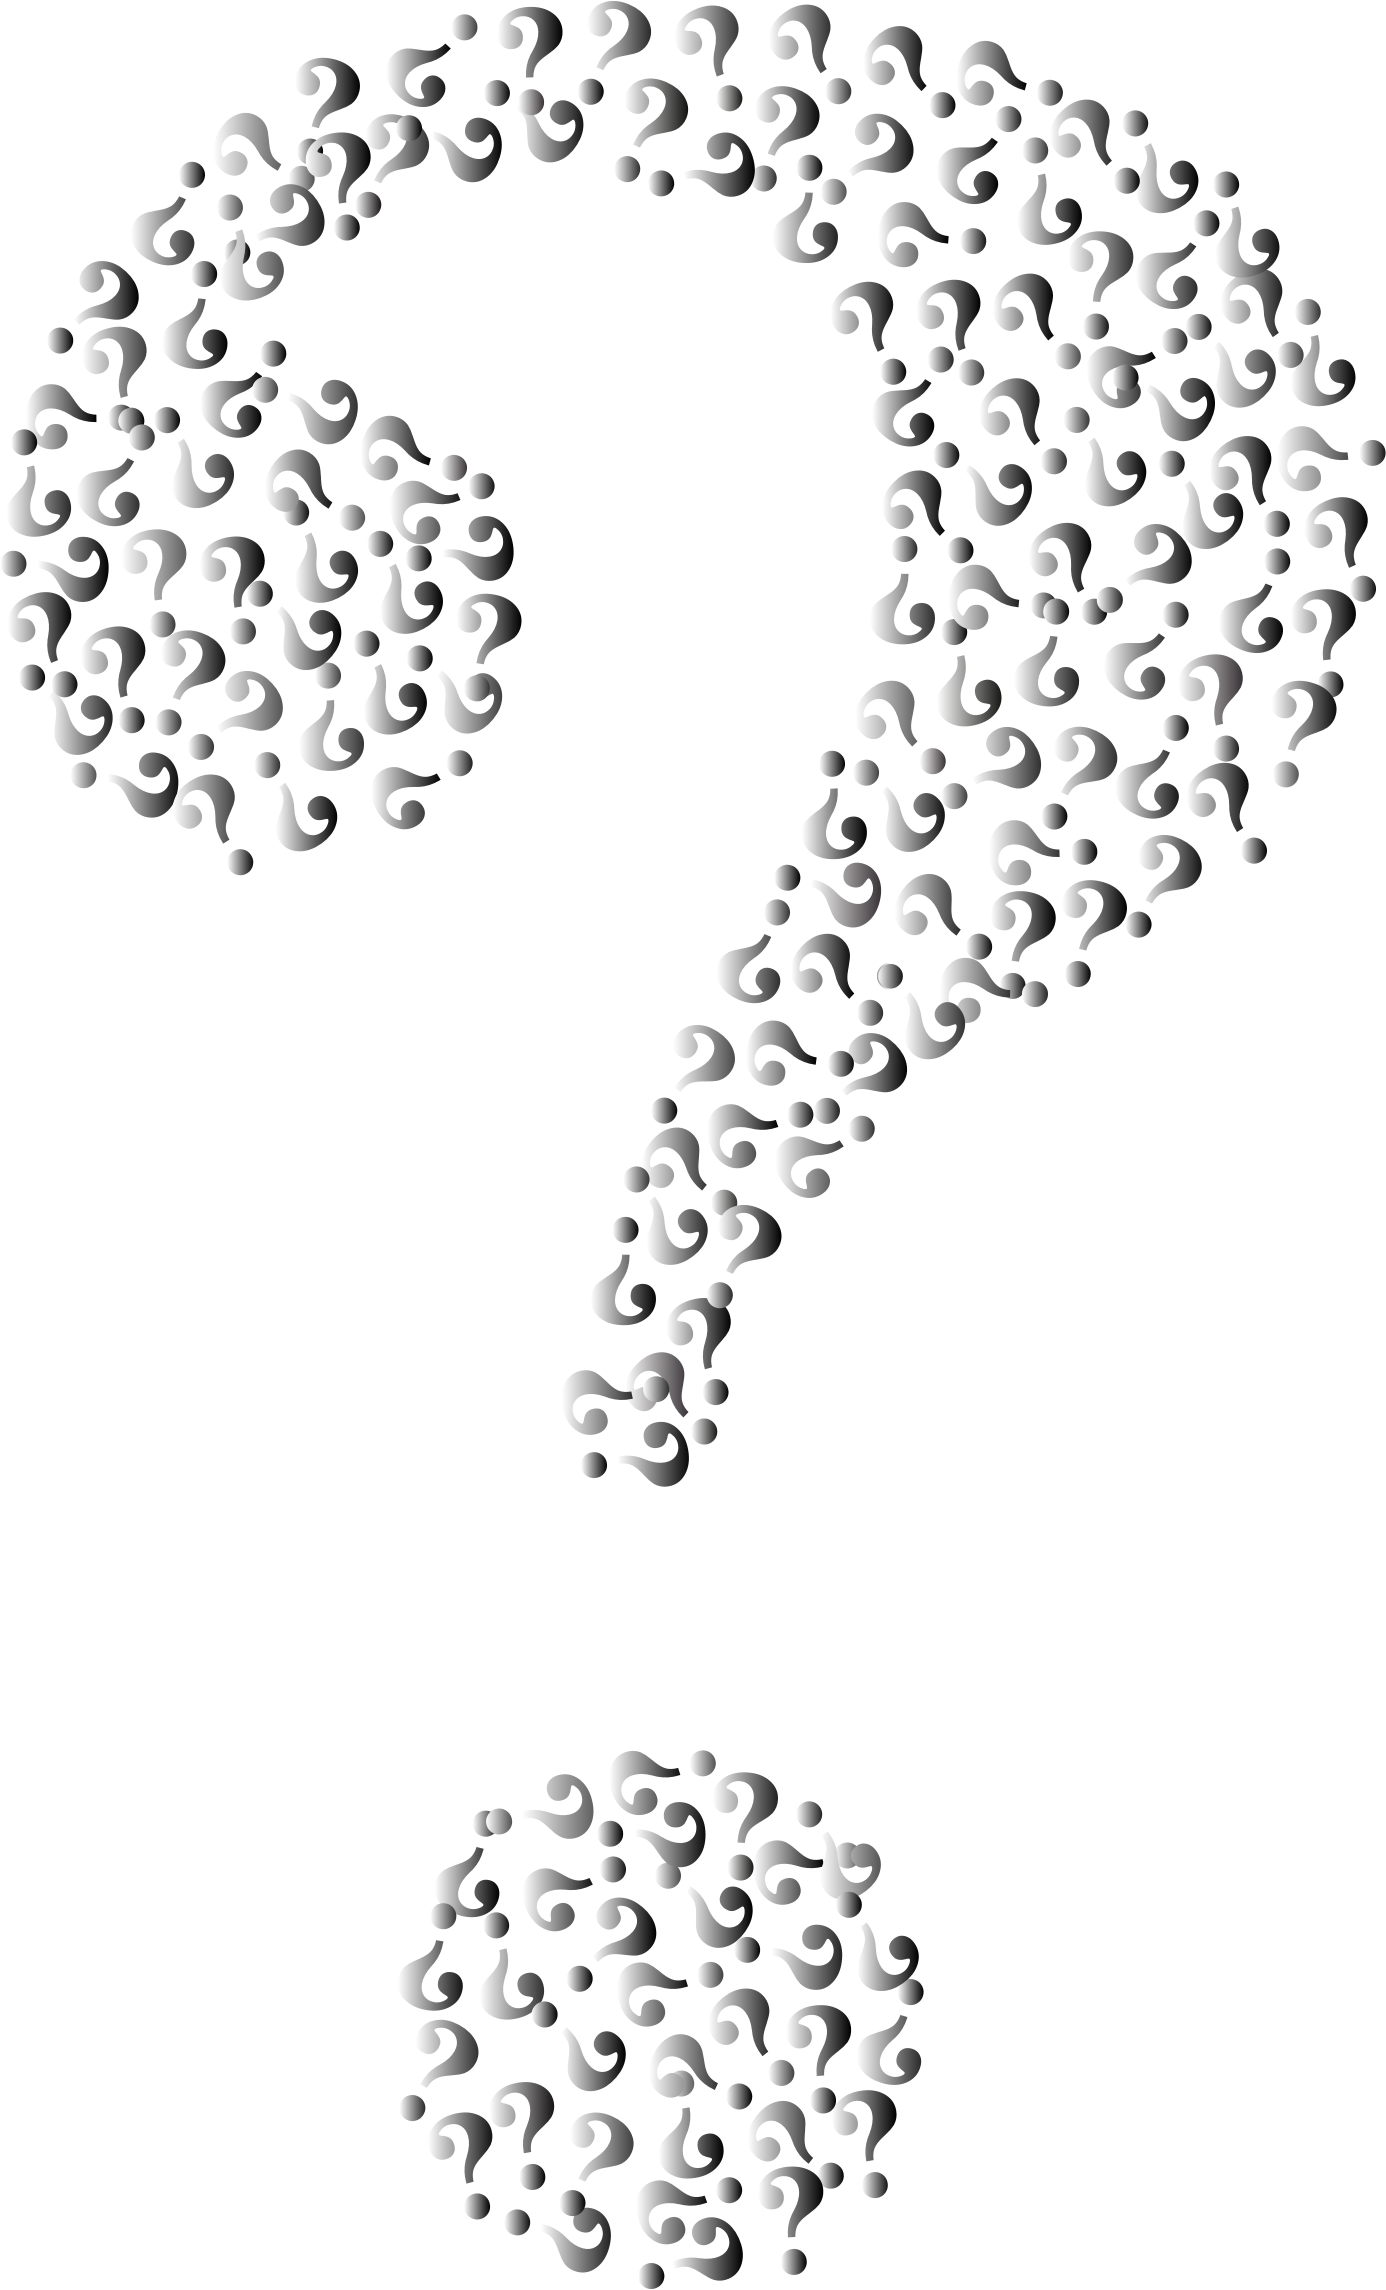 black and white question mark clipart with no back ground ...